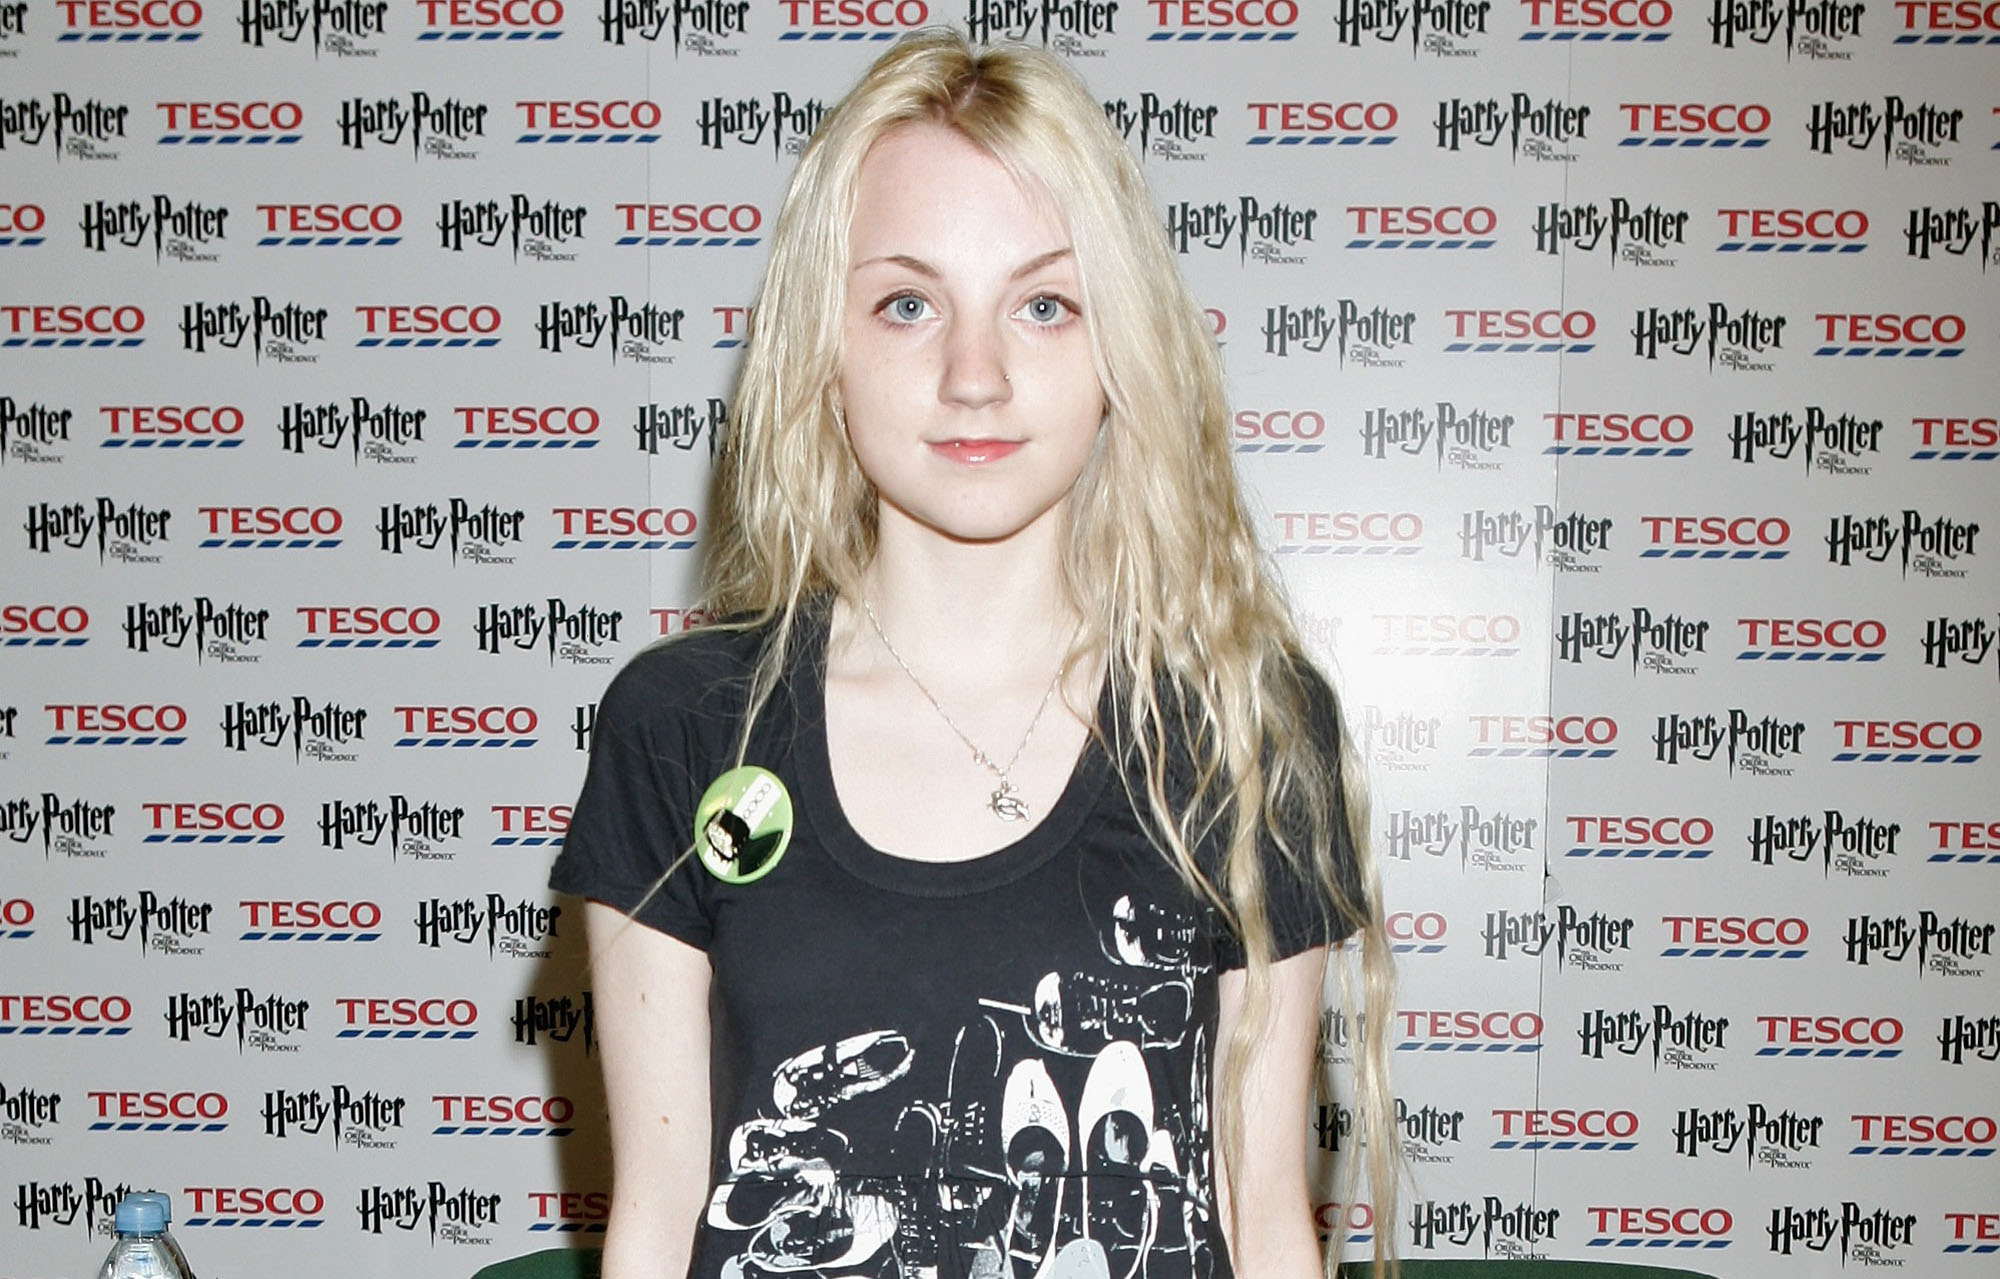 Harry Potter actress Evanna Lynch (Luna Lovegood) poses for a photograph at a photocall in Tescos Extra Watford on July 14, 2007 in London, England.  (Photo by Chris Jackson/Getty Images) (Chris Jackson&mdash;Getty Images)